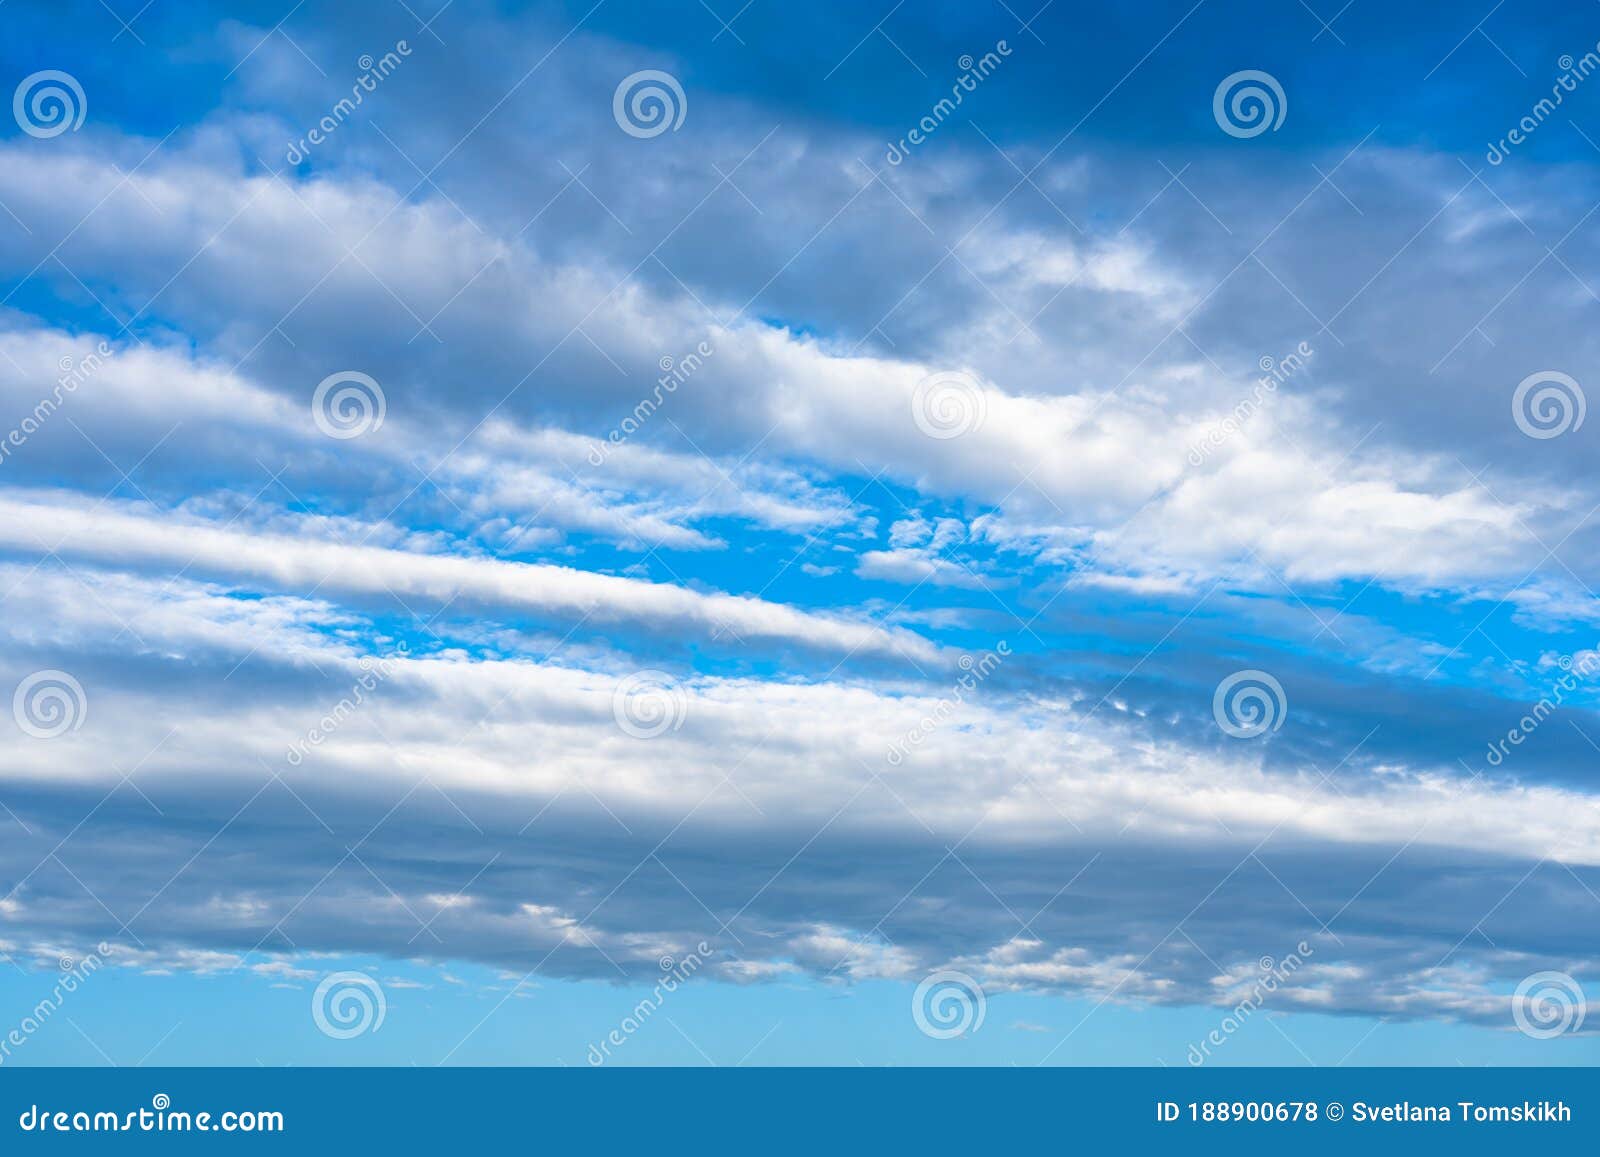 Beautiful Blue Sky With Dramatic Clouds Weather Nature Cloud Background Stock Photo Image Of Oxygen Heaven